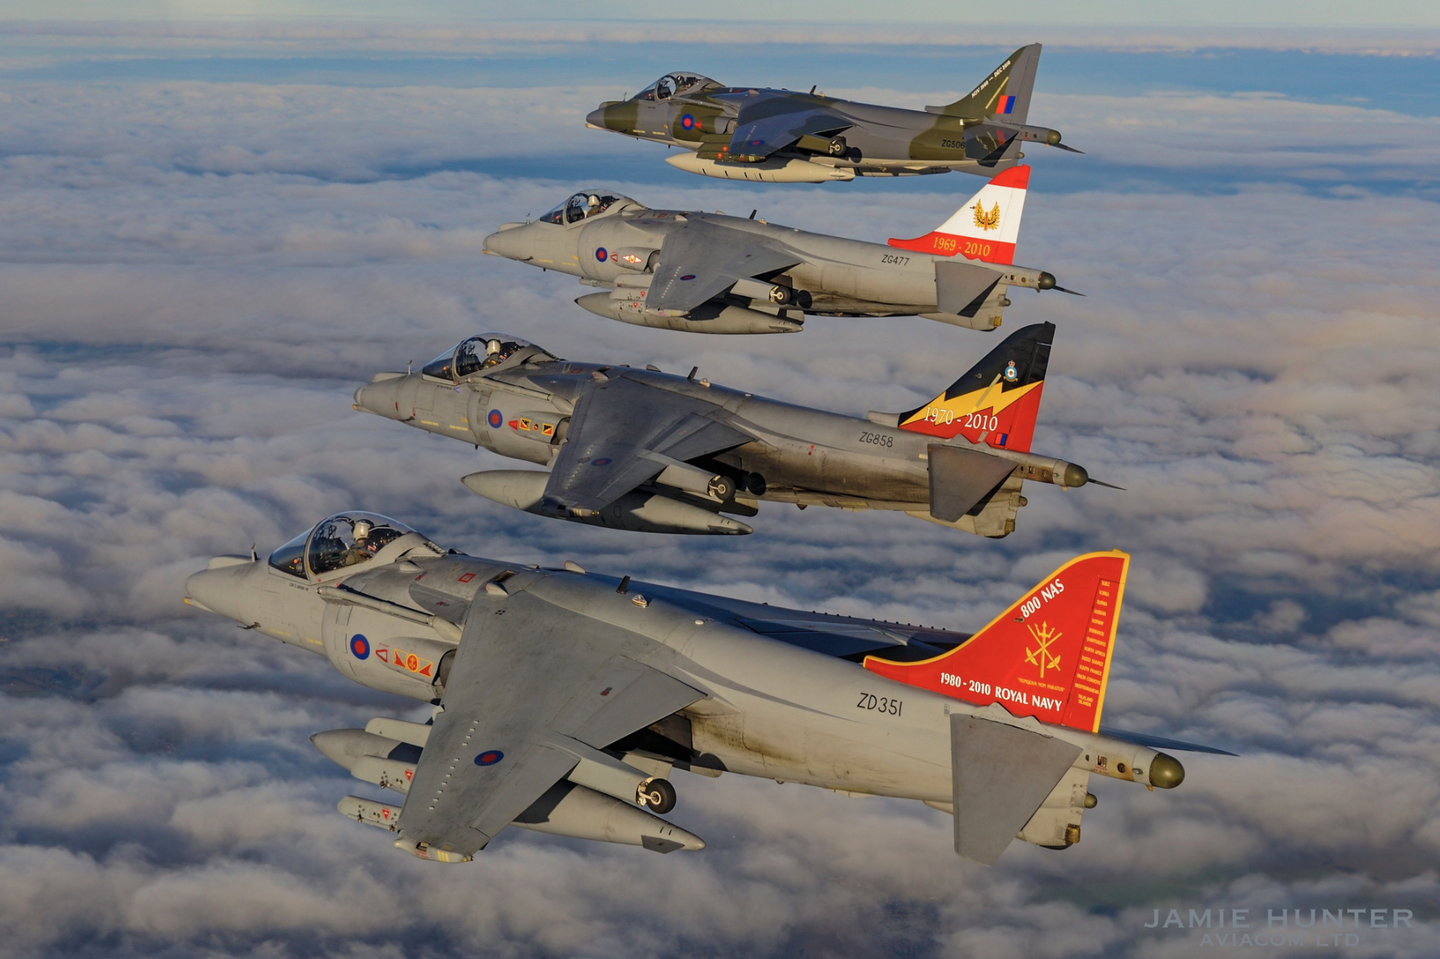 Four specially marked RAF Harrier GR9s fly a photo sortie on December 13, 2010, two days before the United Kingdom retired its last Harriers. <em>Jamie Hunter</em>